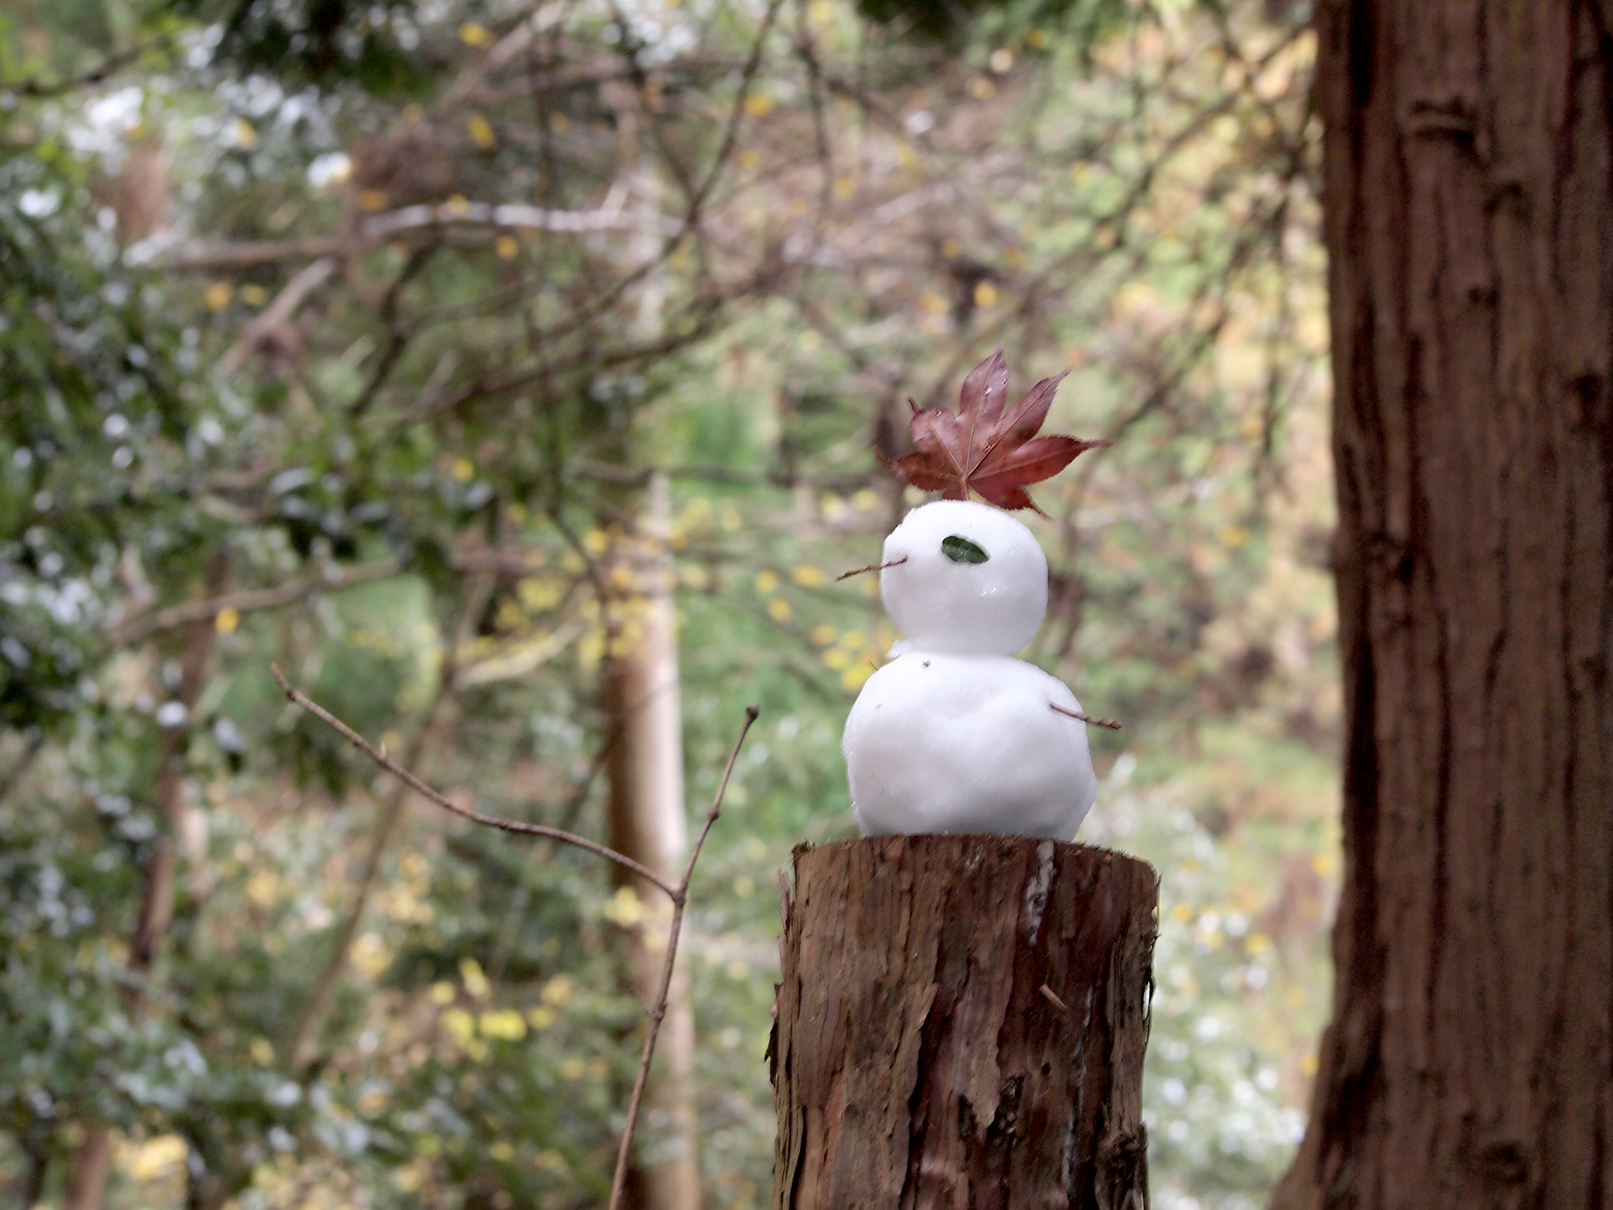 A tiny snowman on the way uphill to Mount Hiei